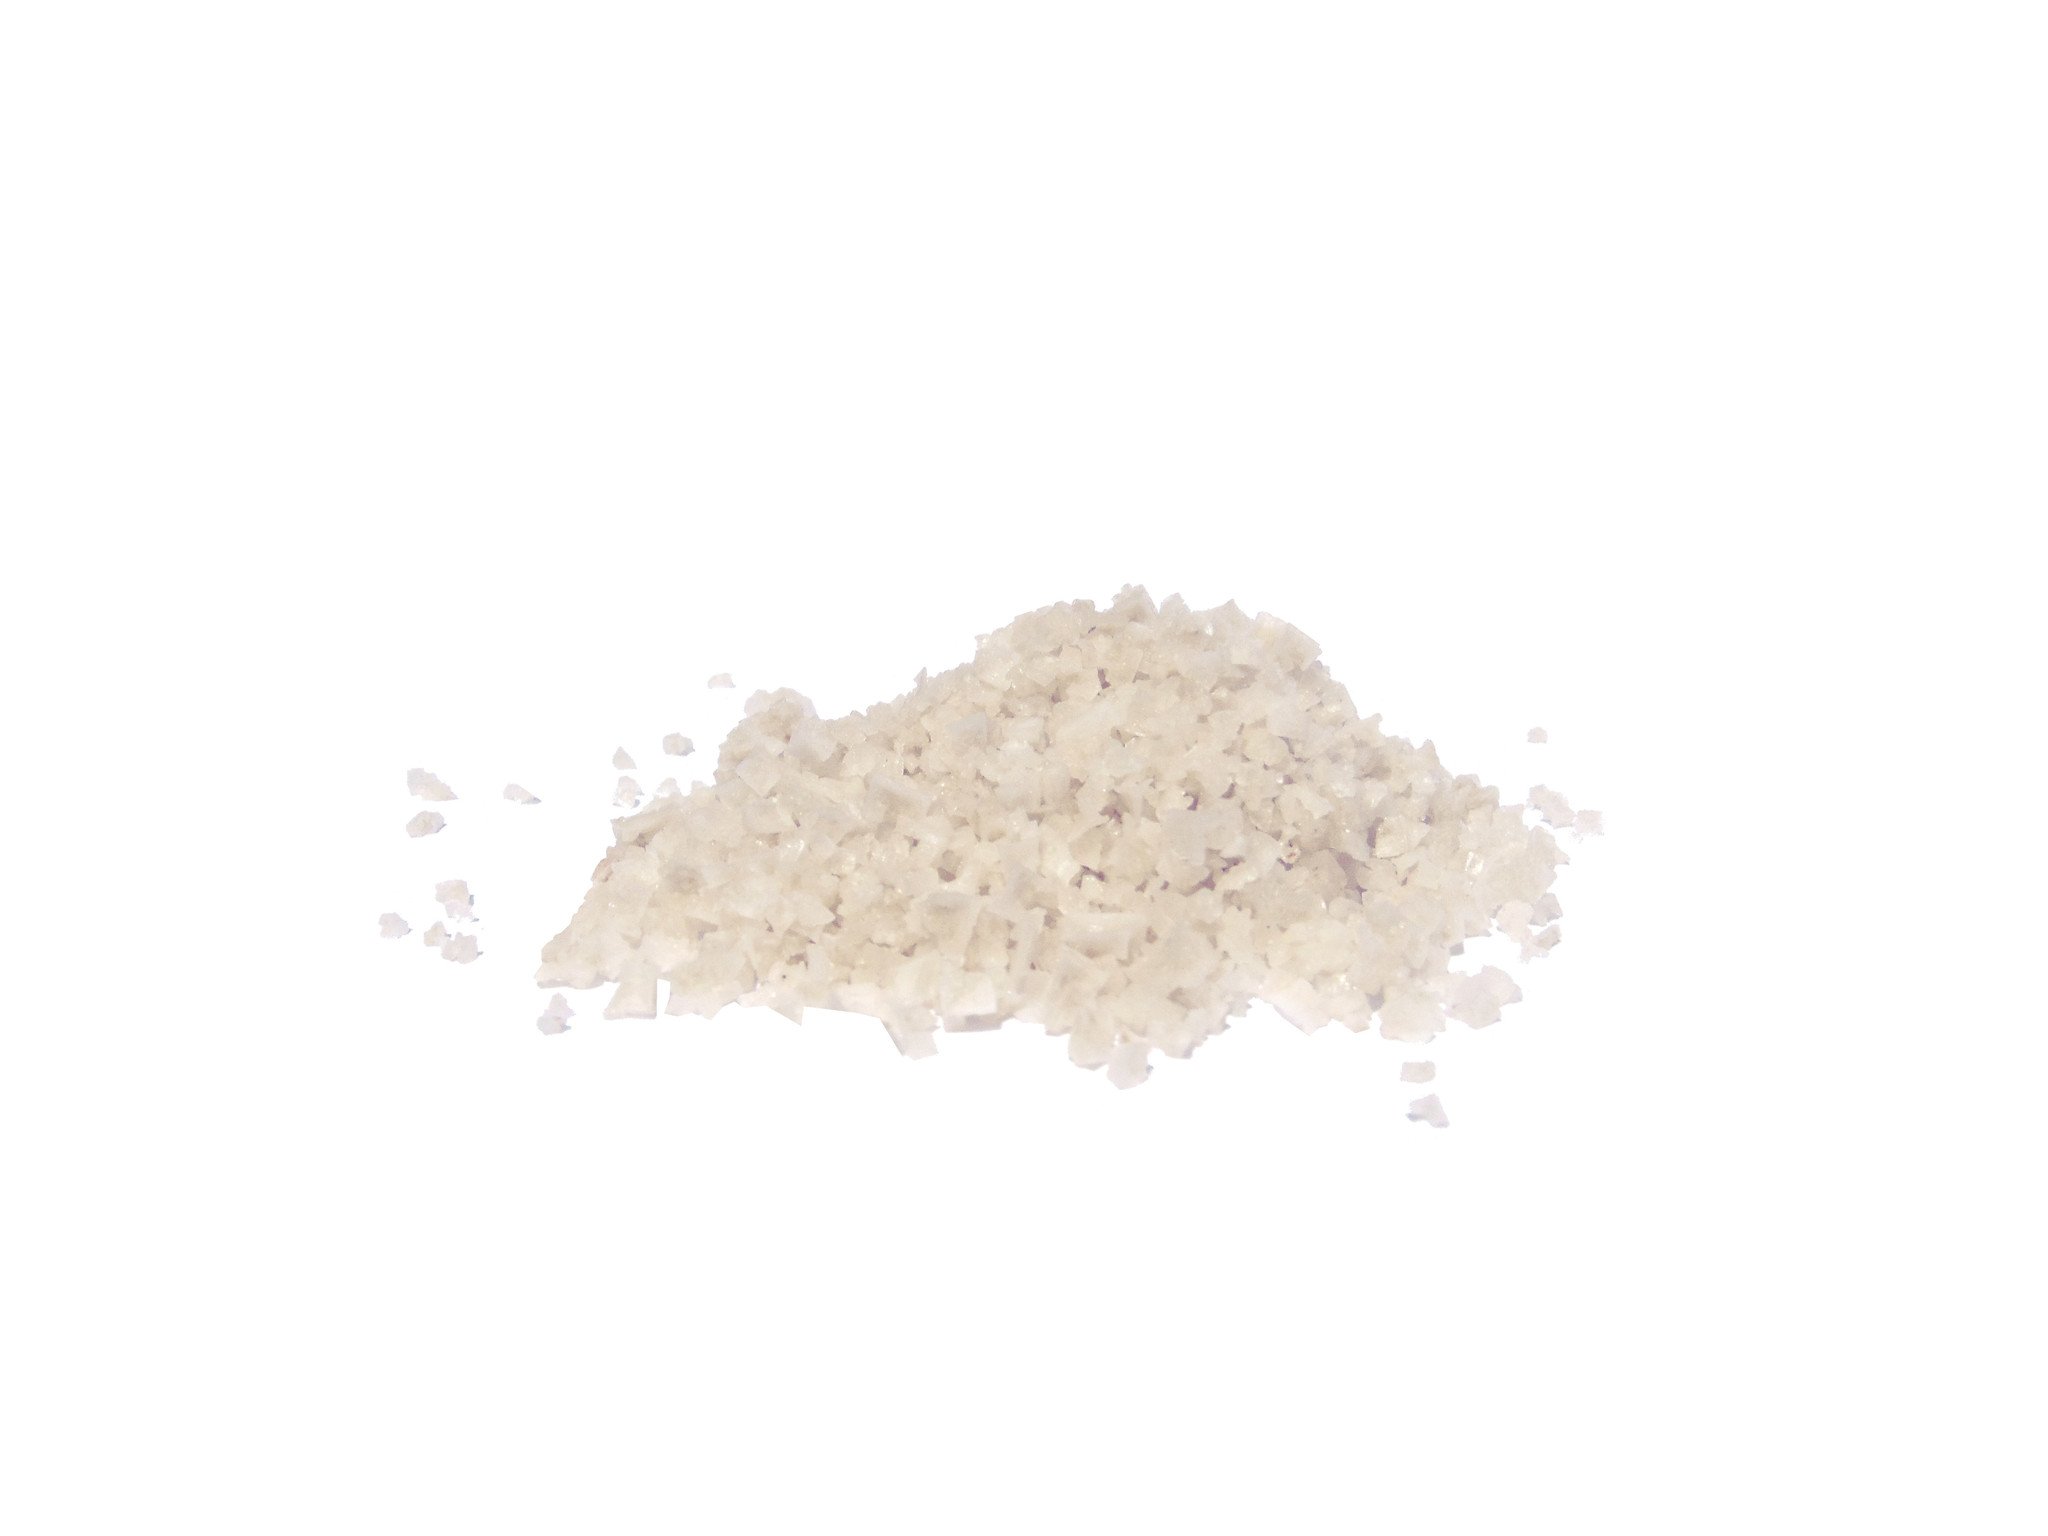 CELTIC SEA SALT 400g (bulk importers from Guerande France) — Essentially  Young